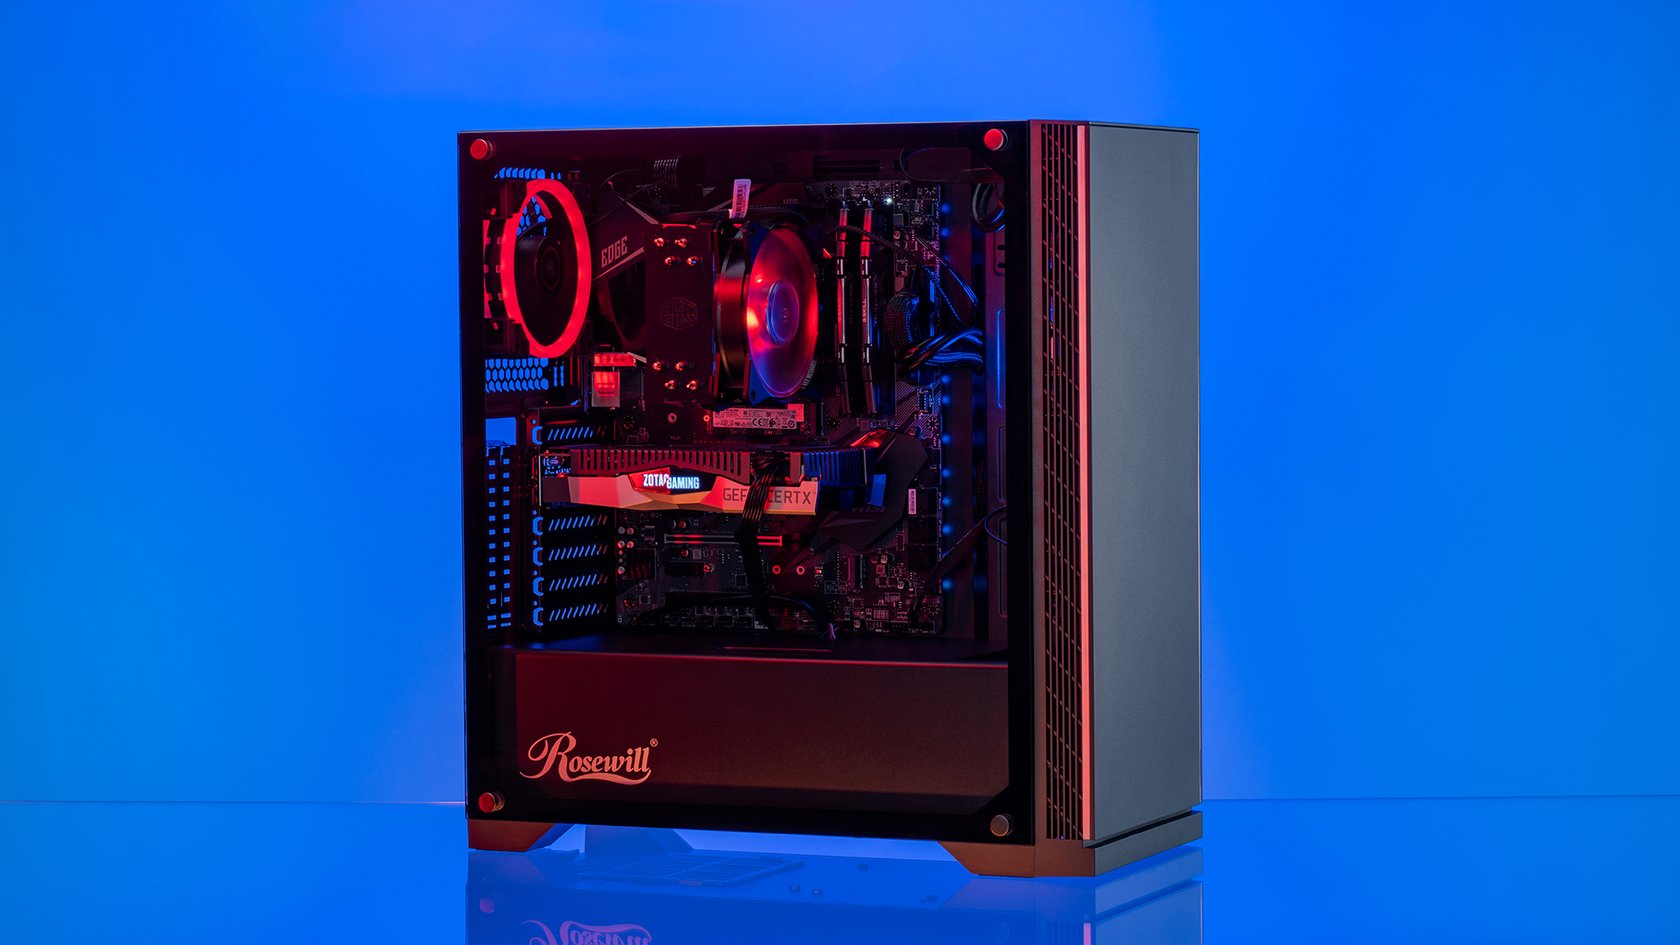 Save $100 on These All-In-One DIY PC Gaming Kits from Newegg